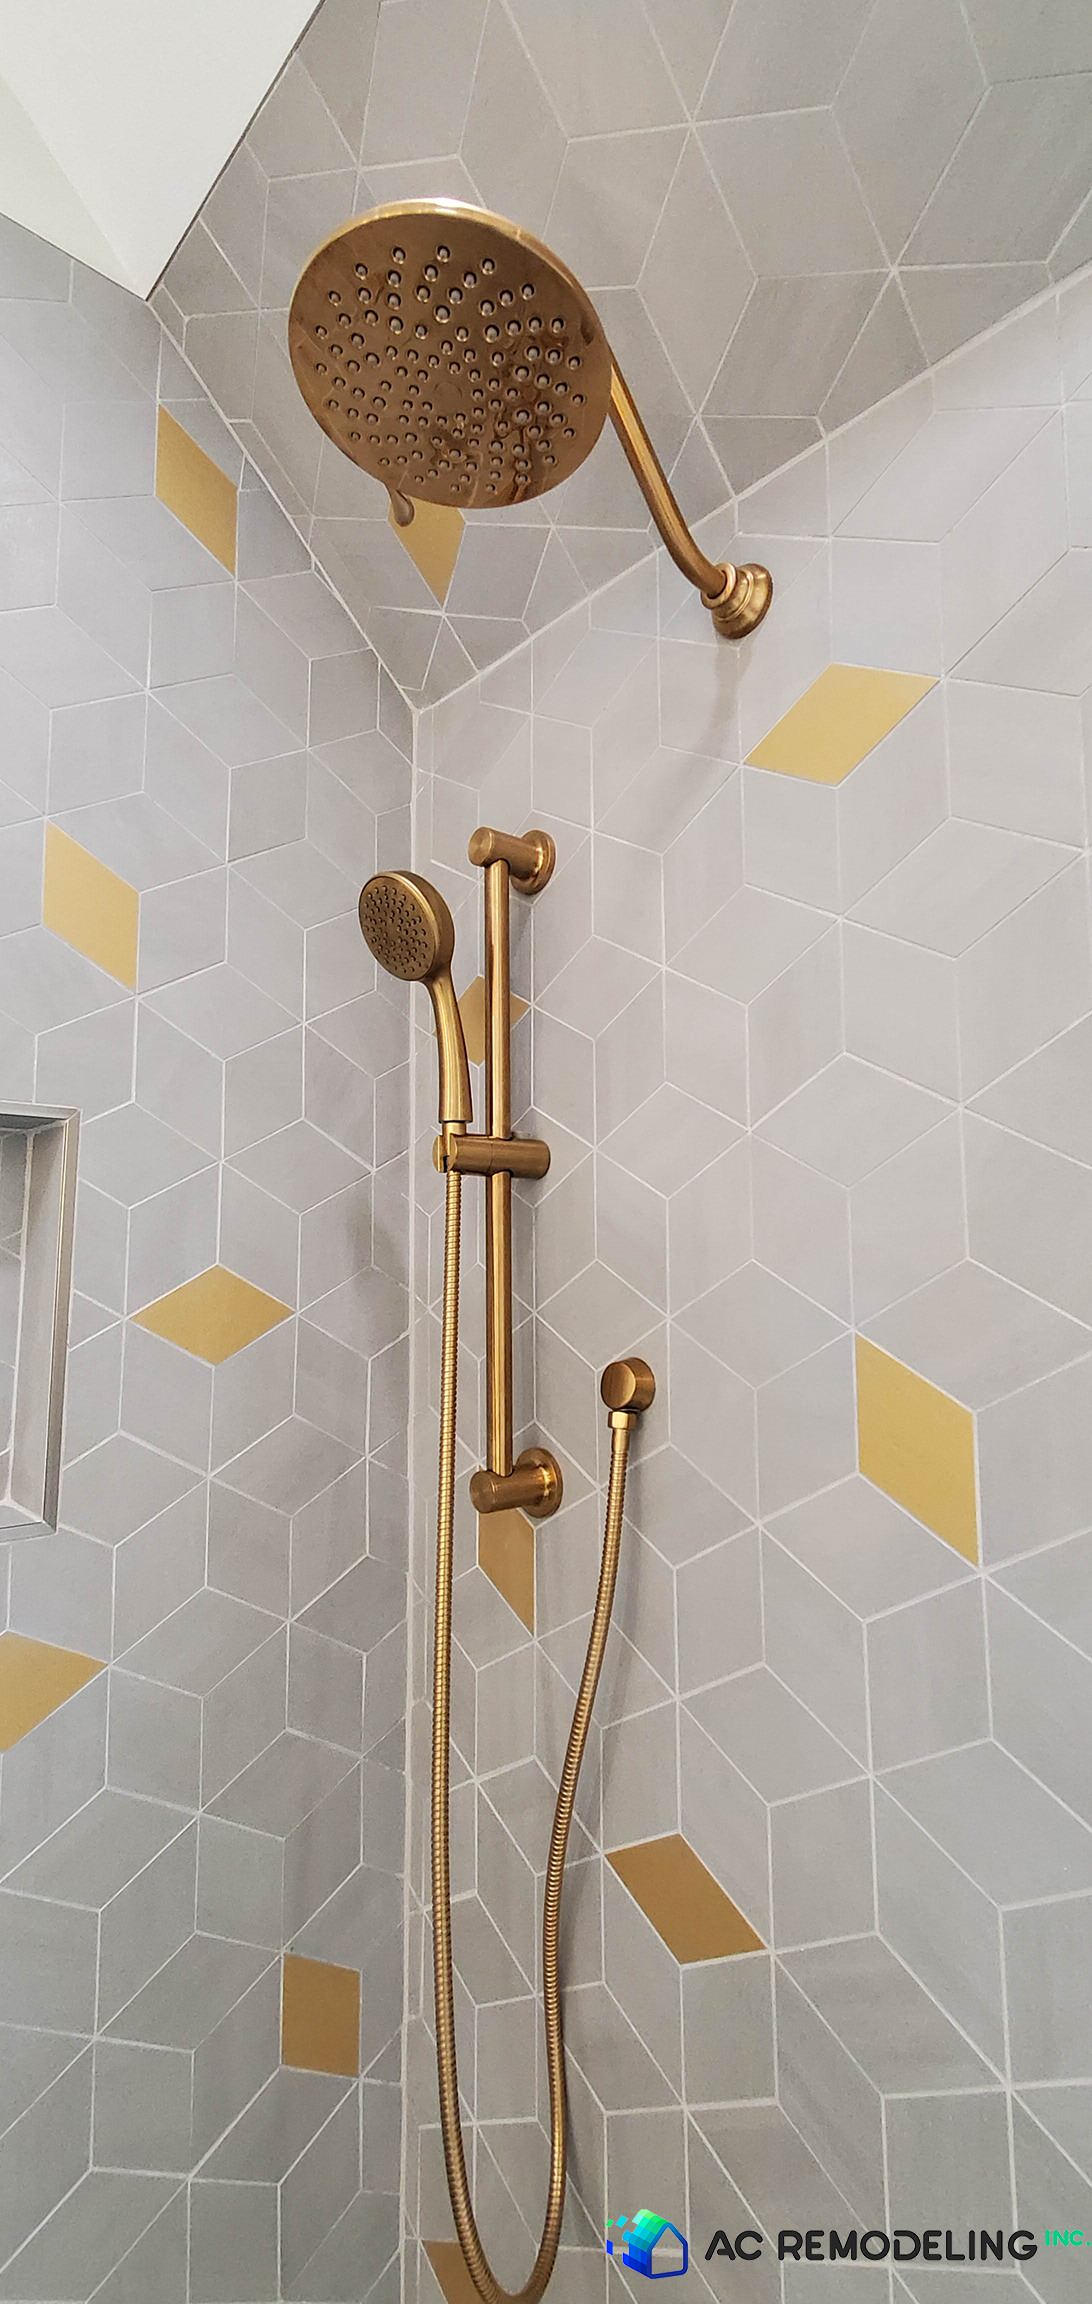 Brushed gold fixtures